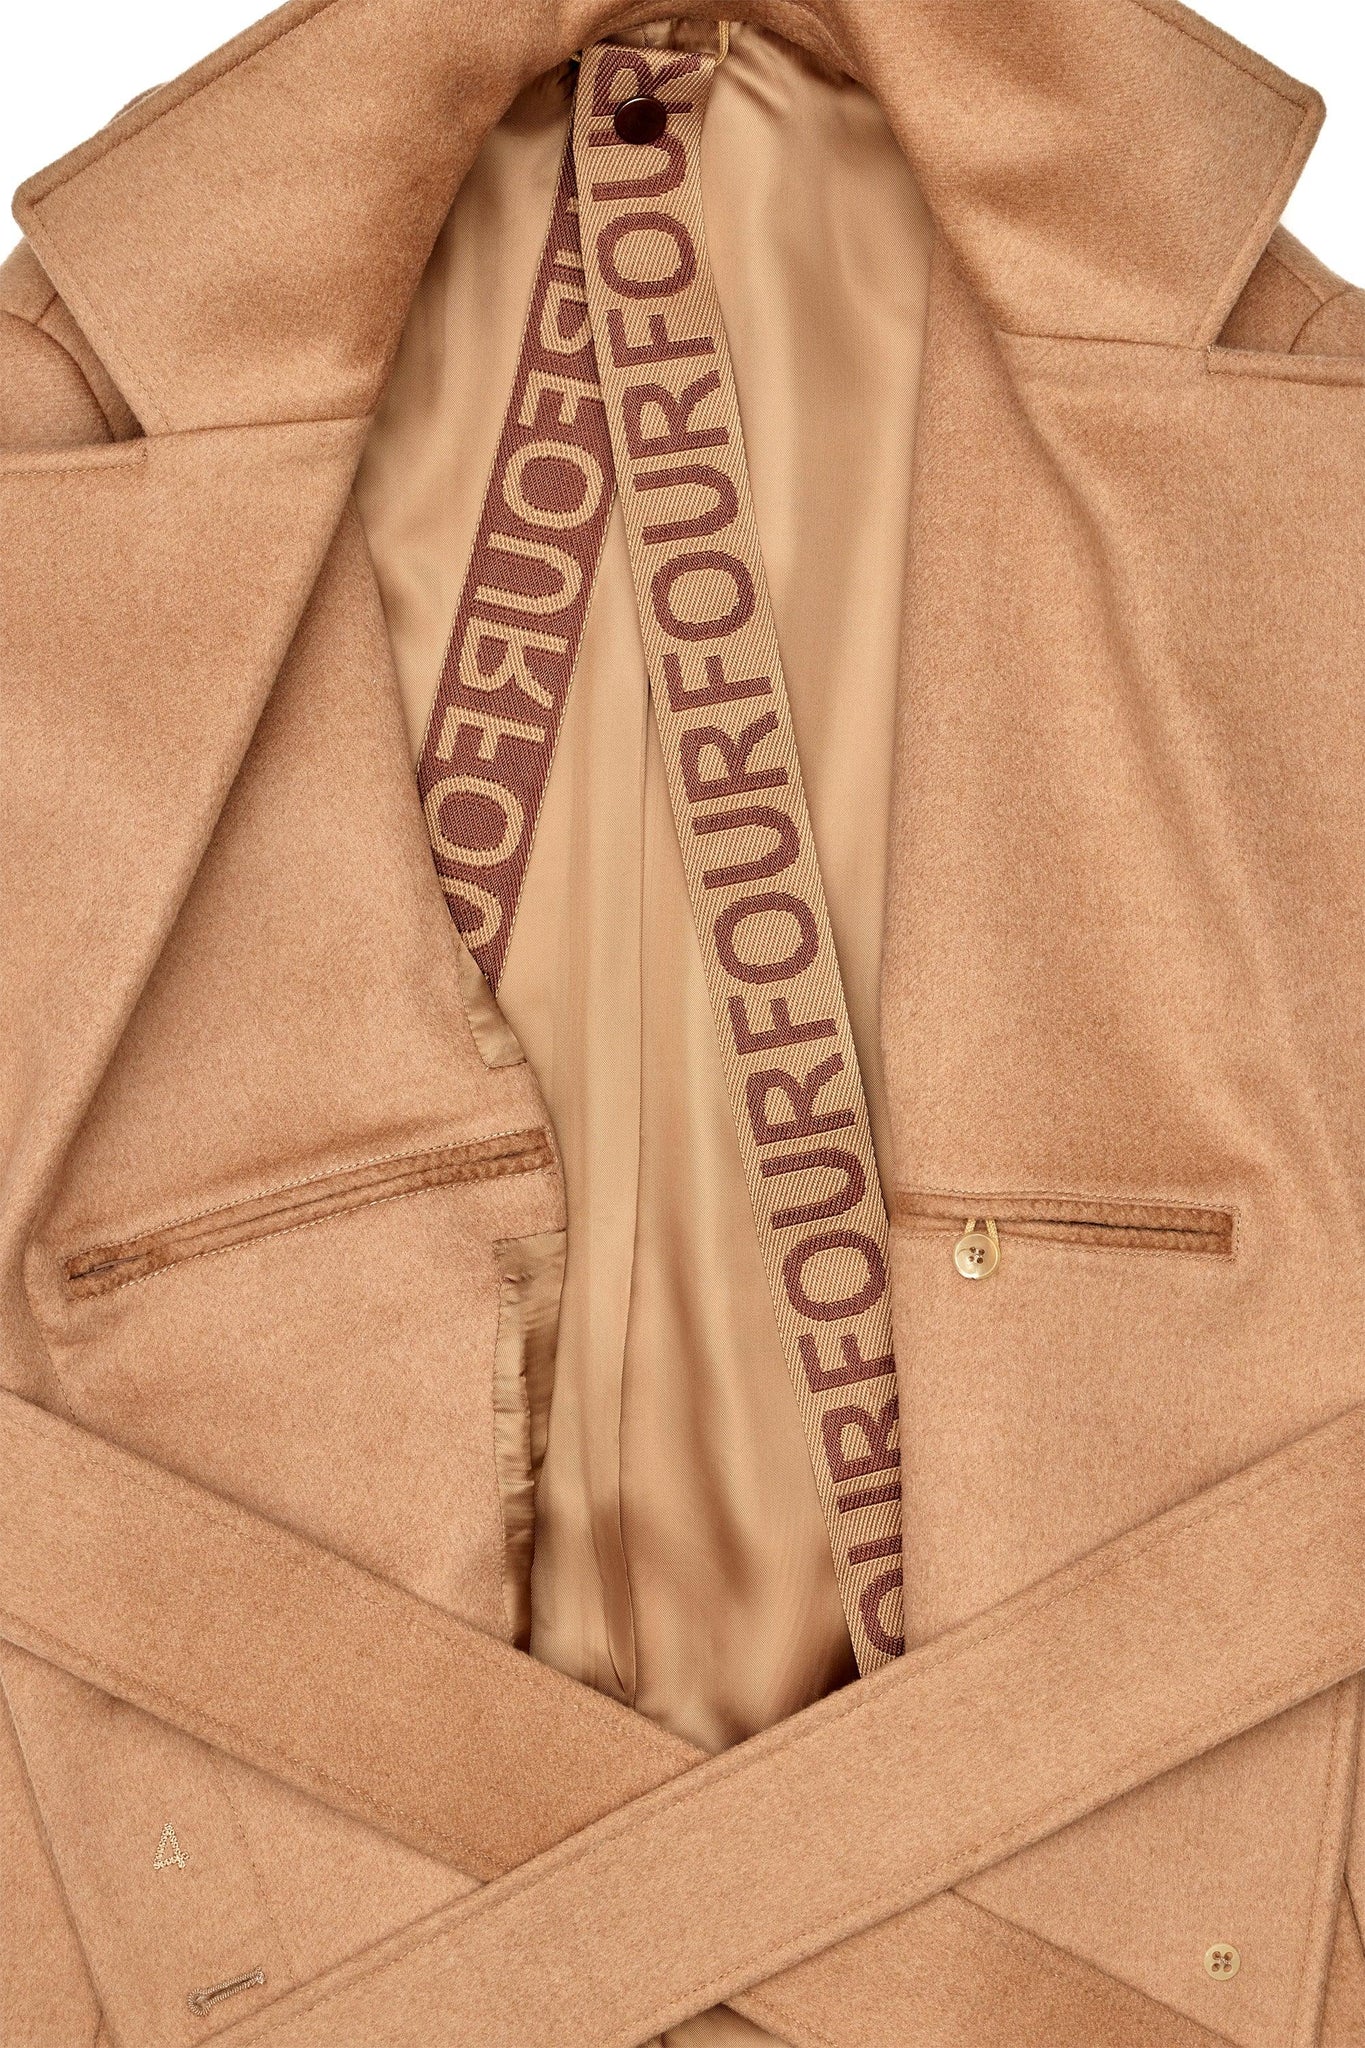 THE Overcoat in 100% camel by 4 in OUTERWEAR